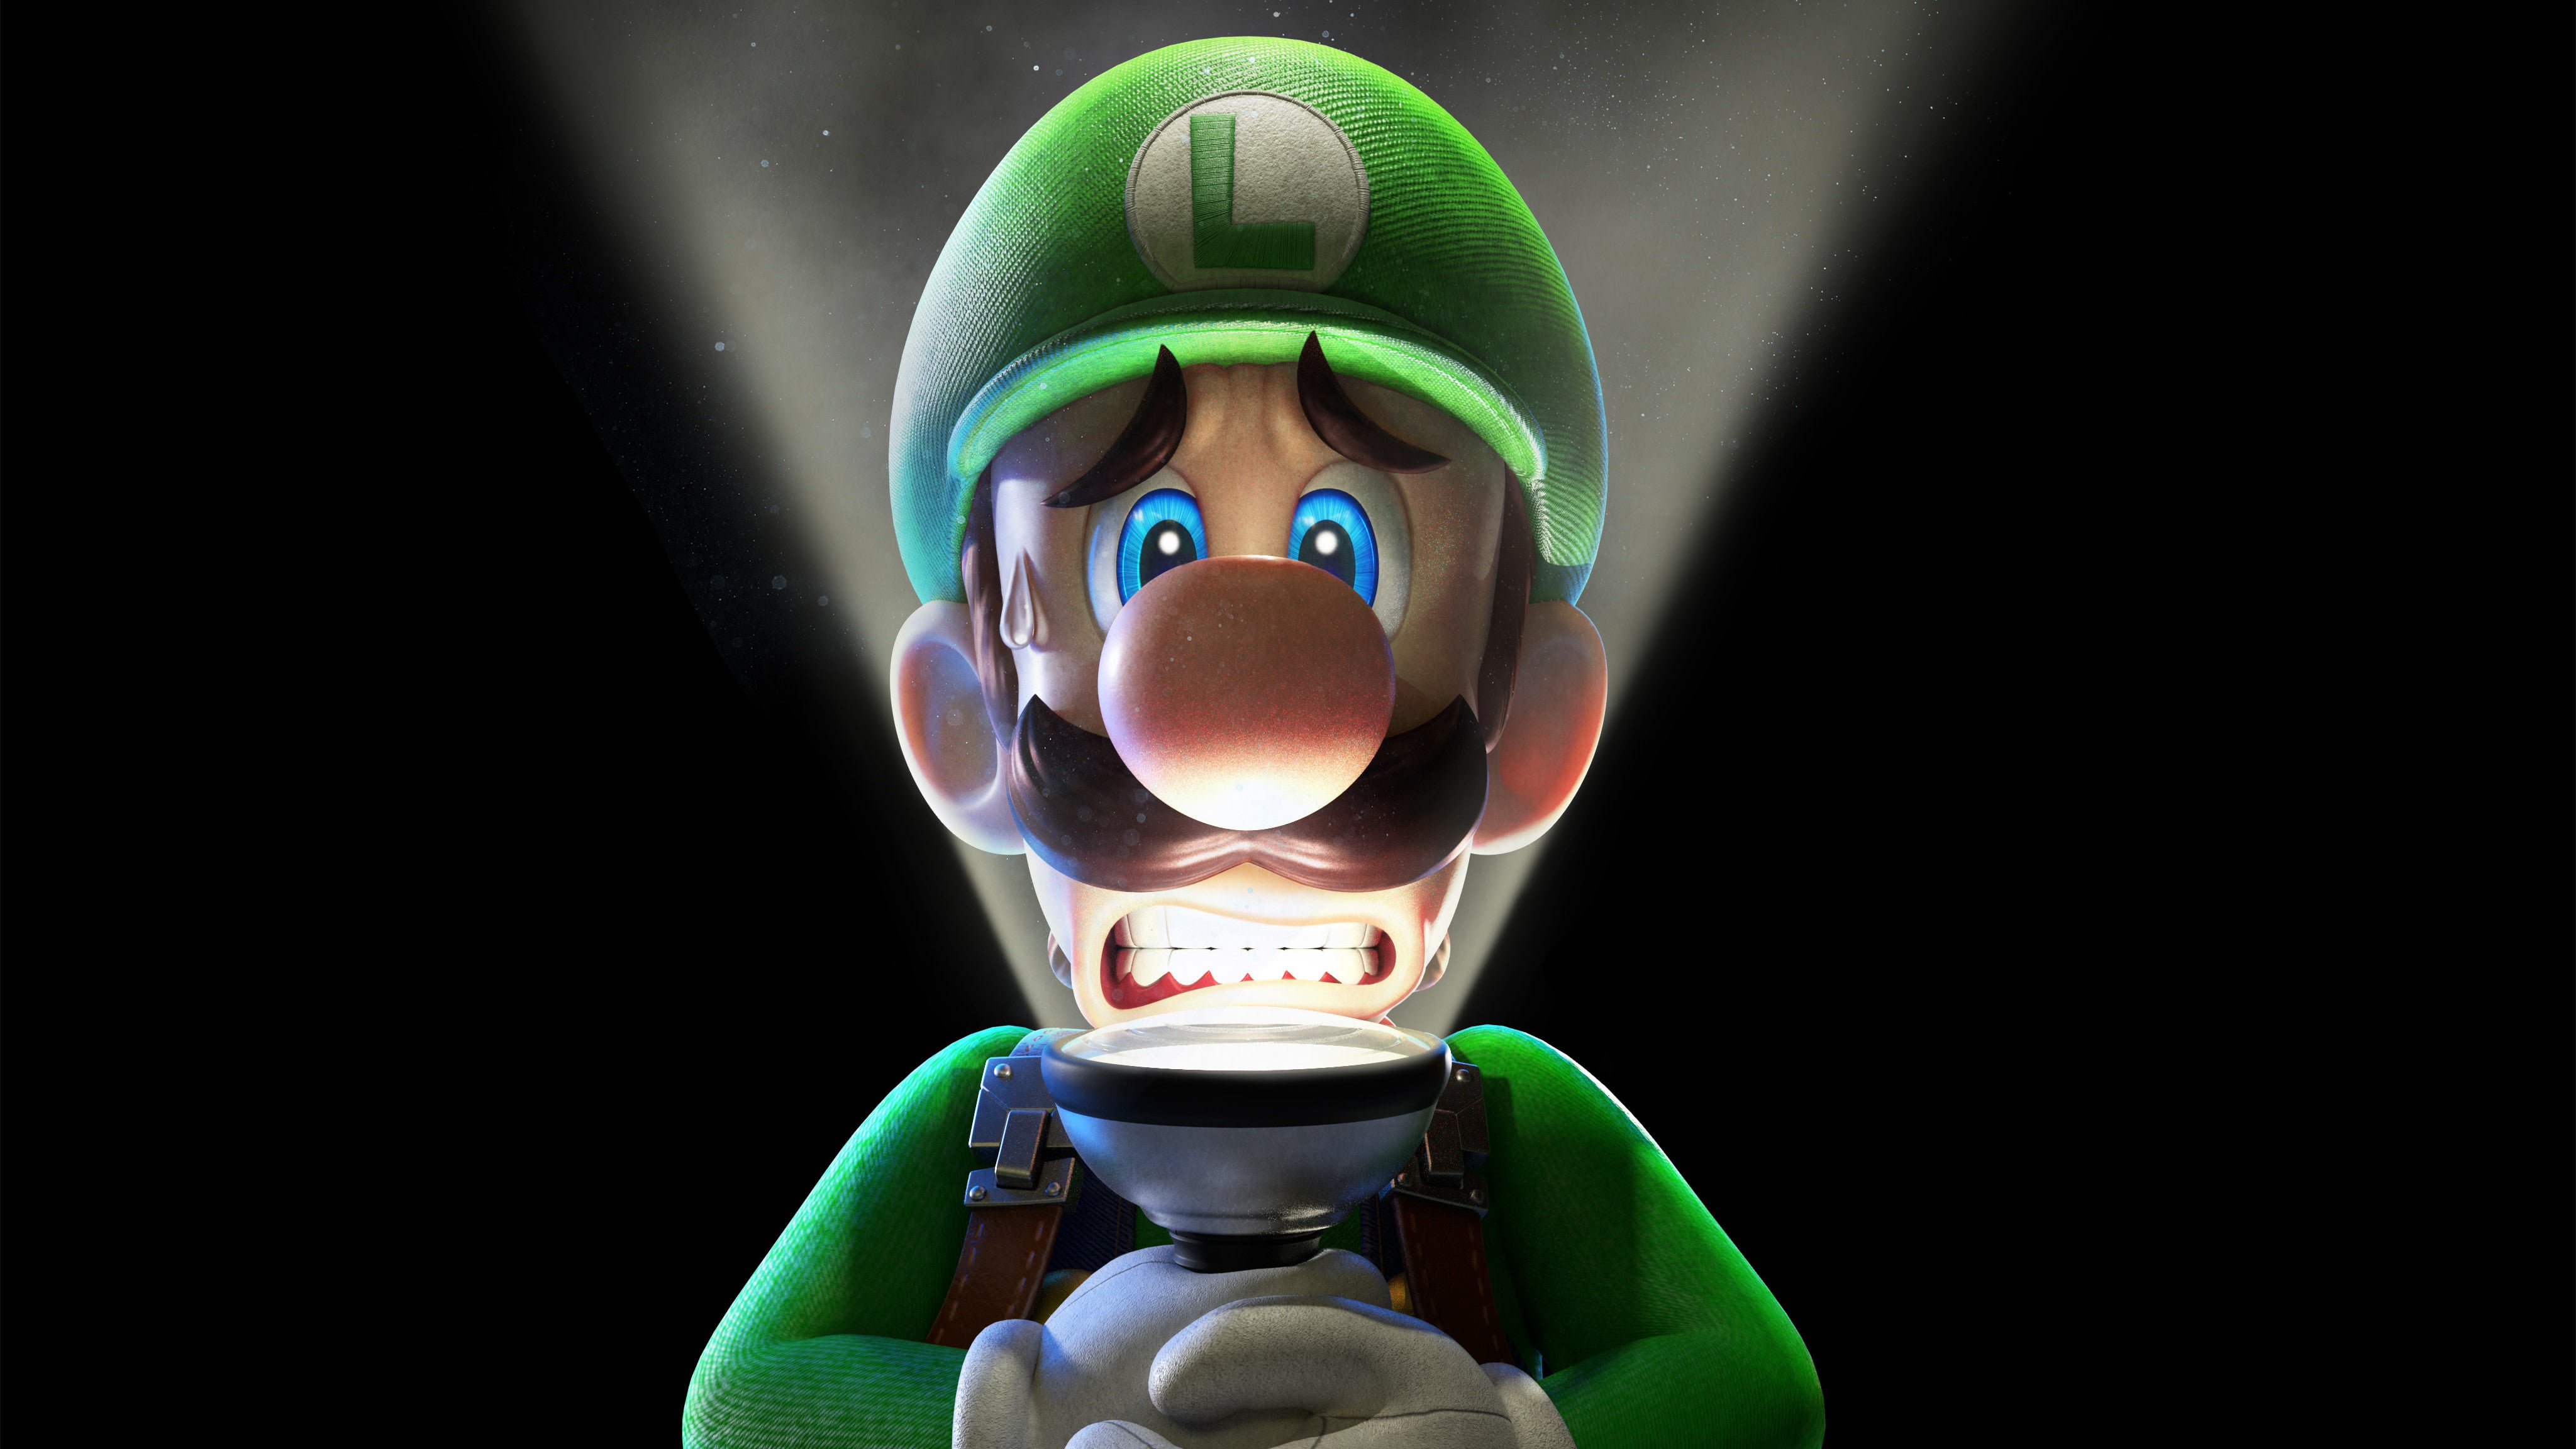 Luigi’s Mansion 3 Developers On Money, Moral Choices And Luigi’s Approach To Heroism